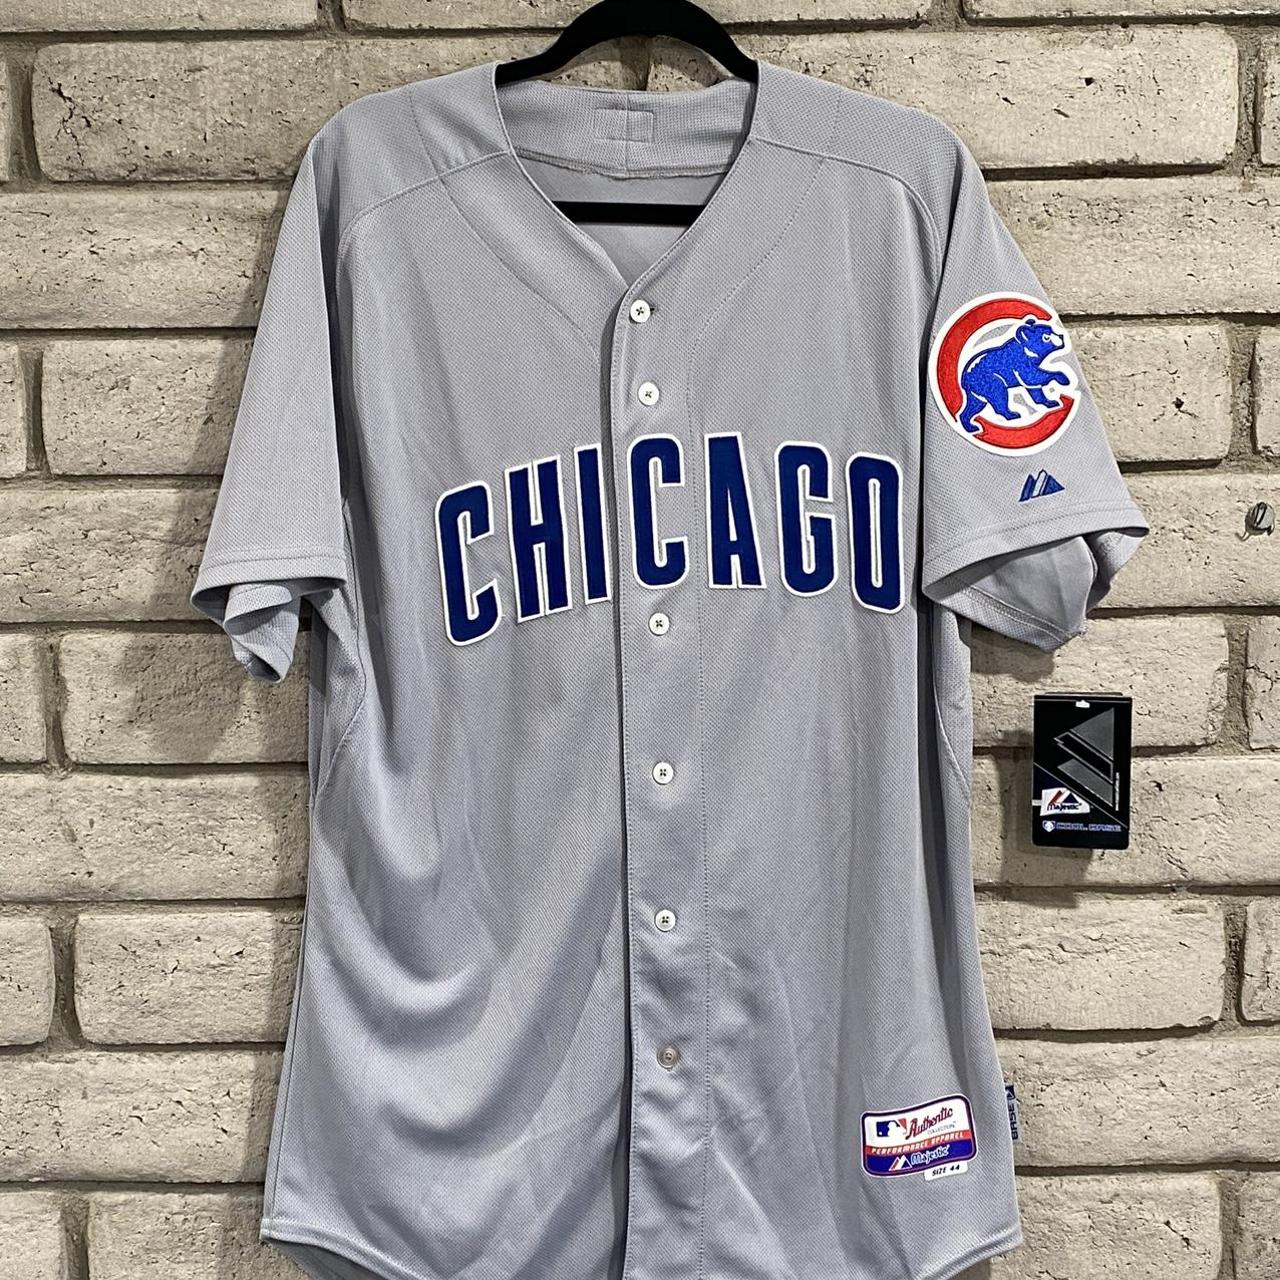 Authentic Majestic Chicago Cubs Jersey  Majestic shirts, Chicago cubs  jersey, Casual shirts for men